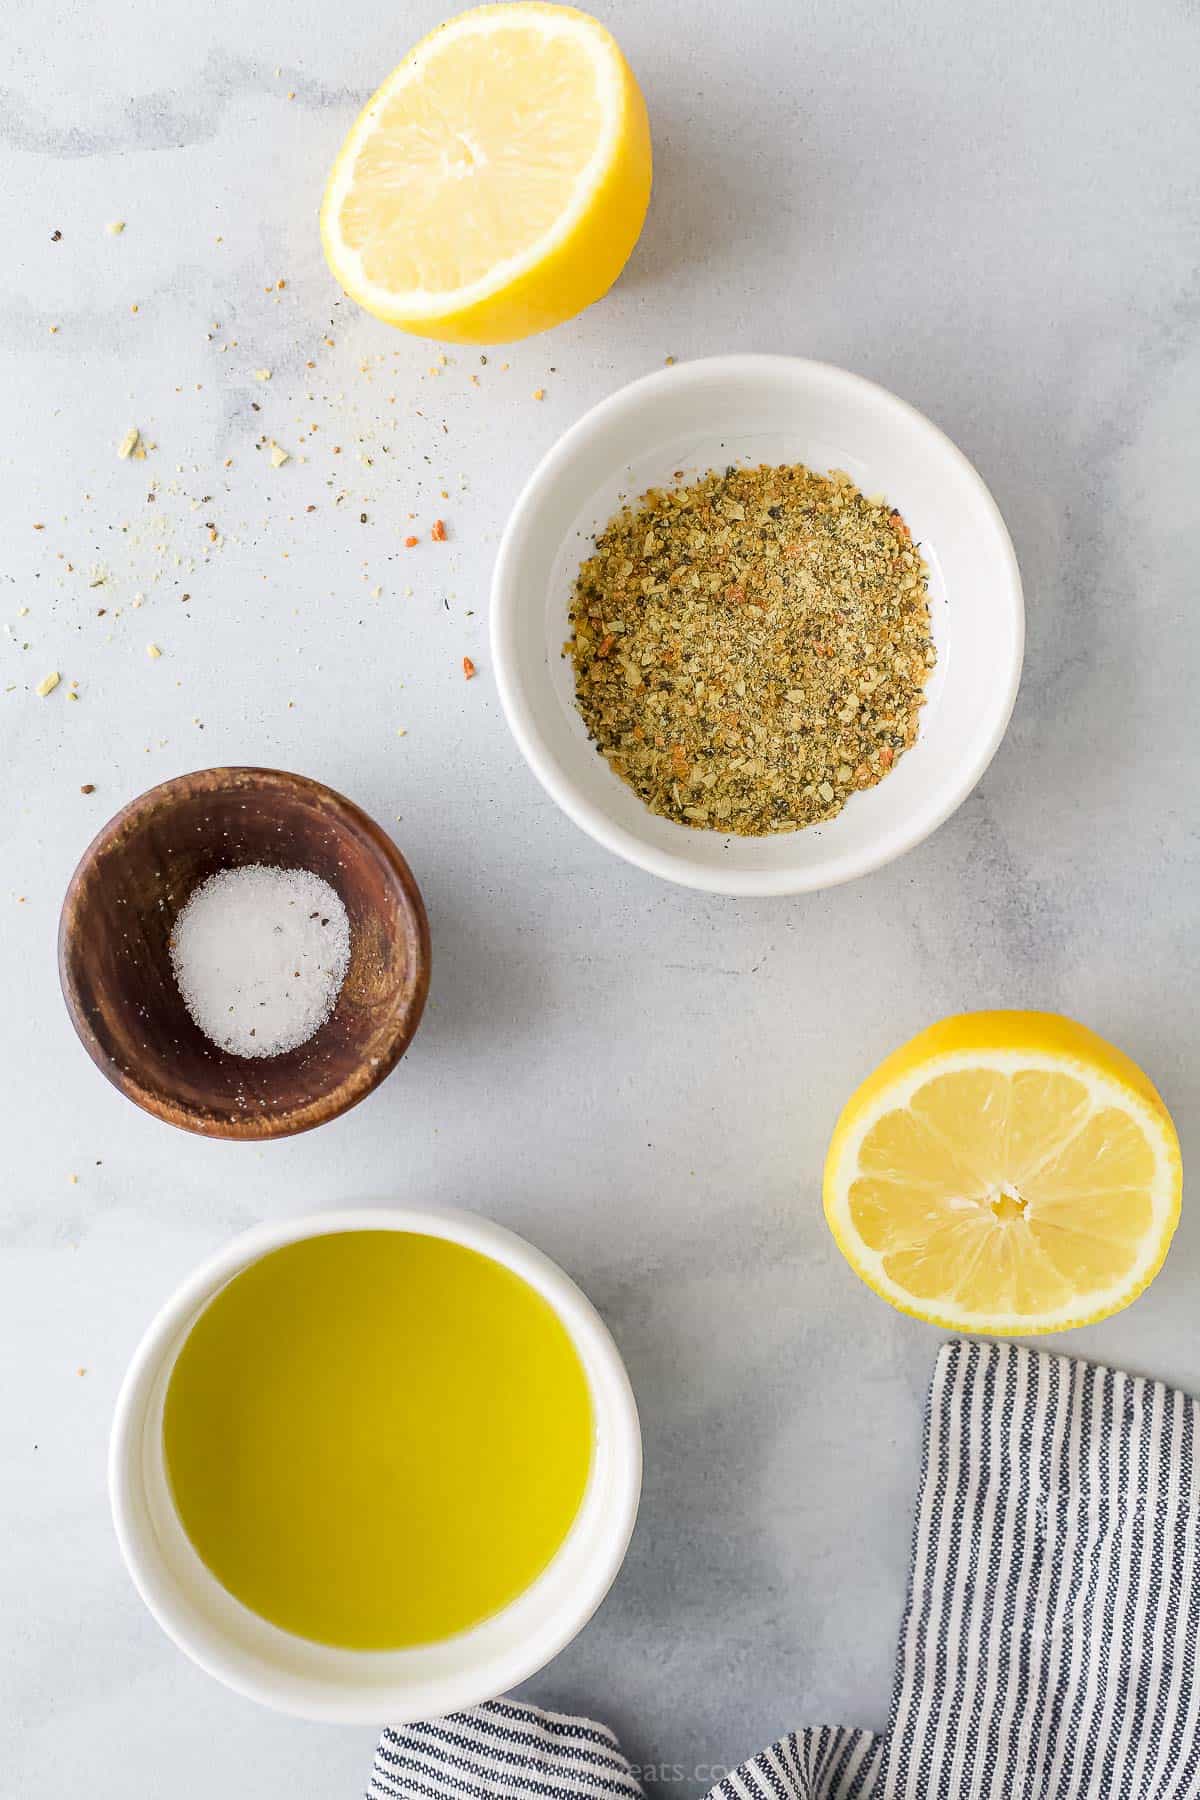 Olive oil, fresh lemon halves and the rest of the ingredients on a kitchen countertop beside a striped dishtowel.